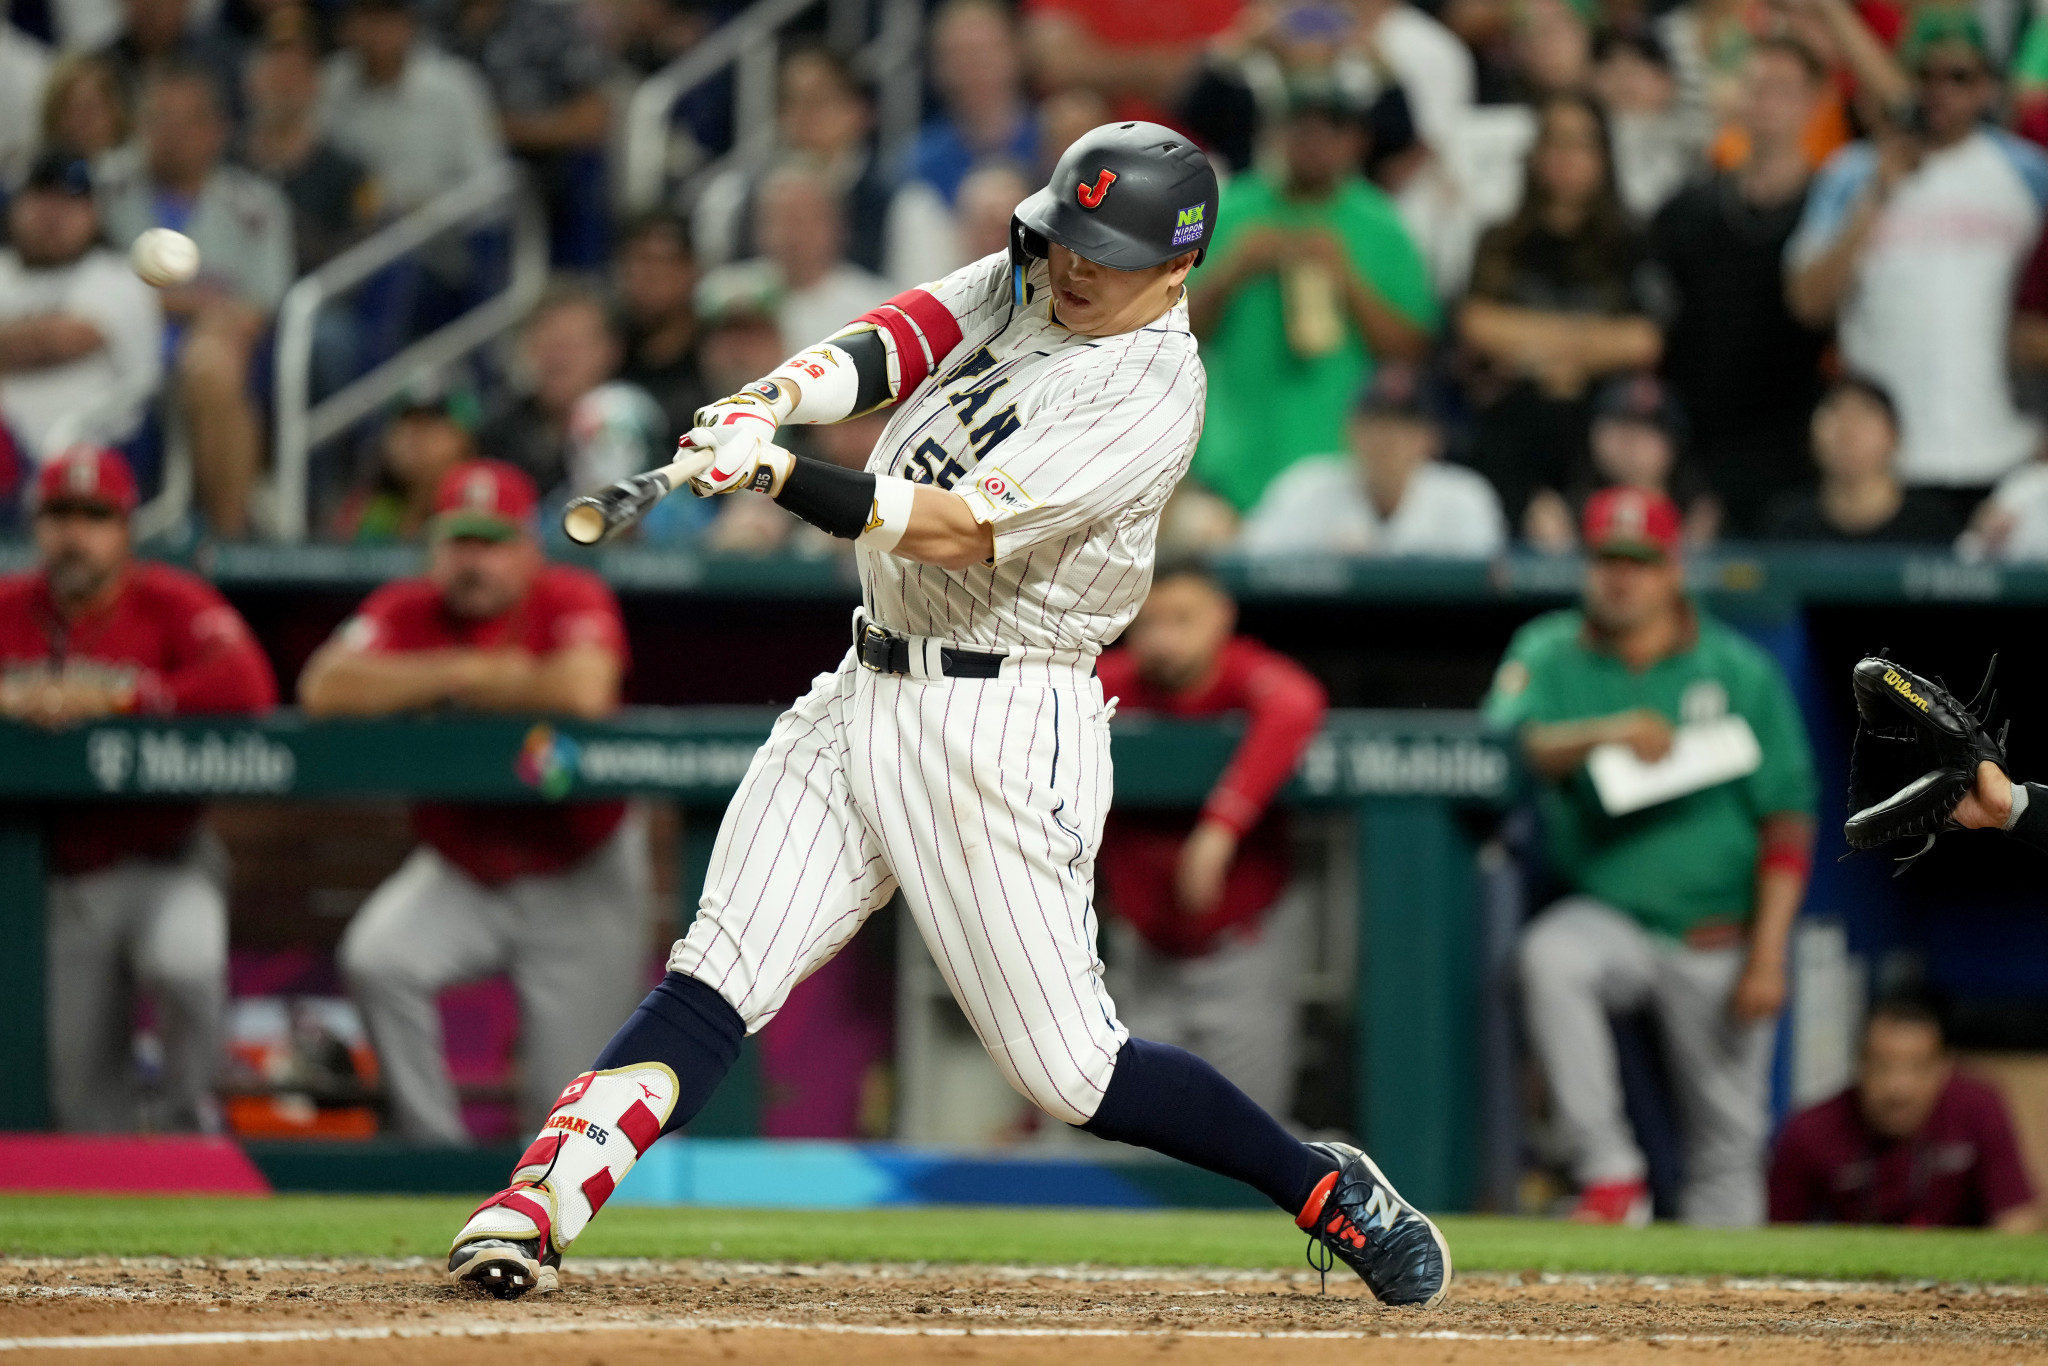 Munetaka Murakami hit a two-run ninth inning double against Mexico in Miami to send Japan into their first World Baseball Classic final since 2009 ©Getty Images 